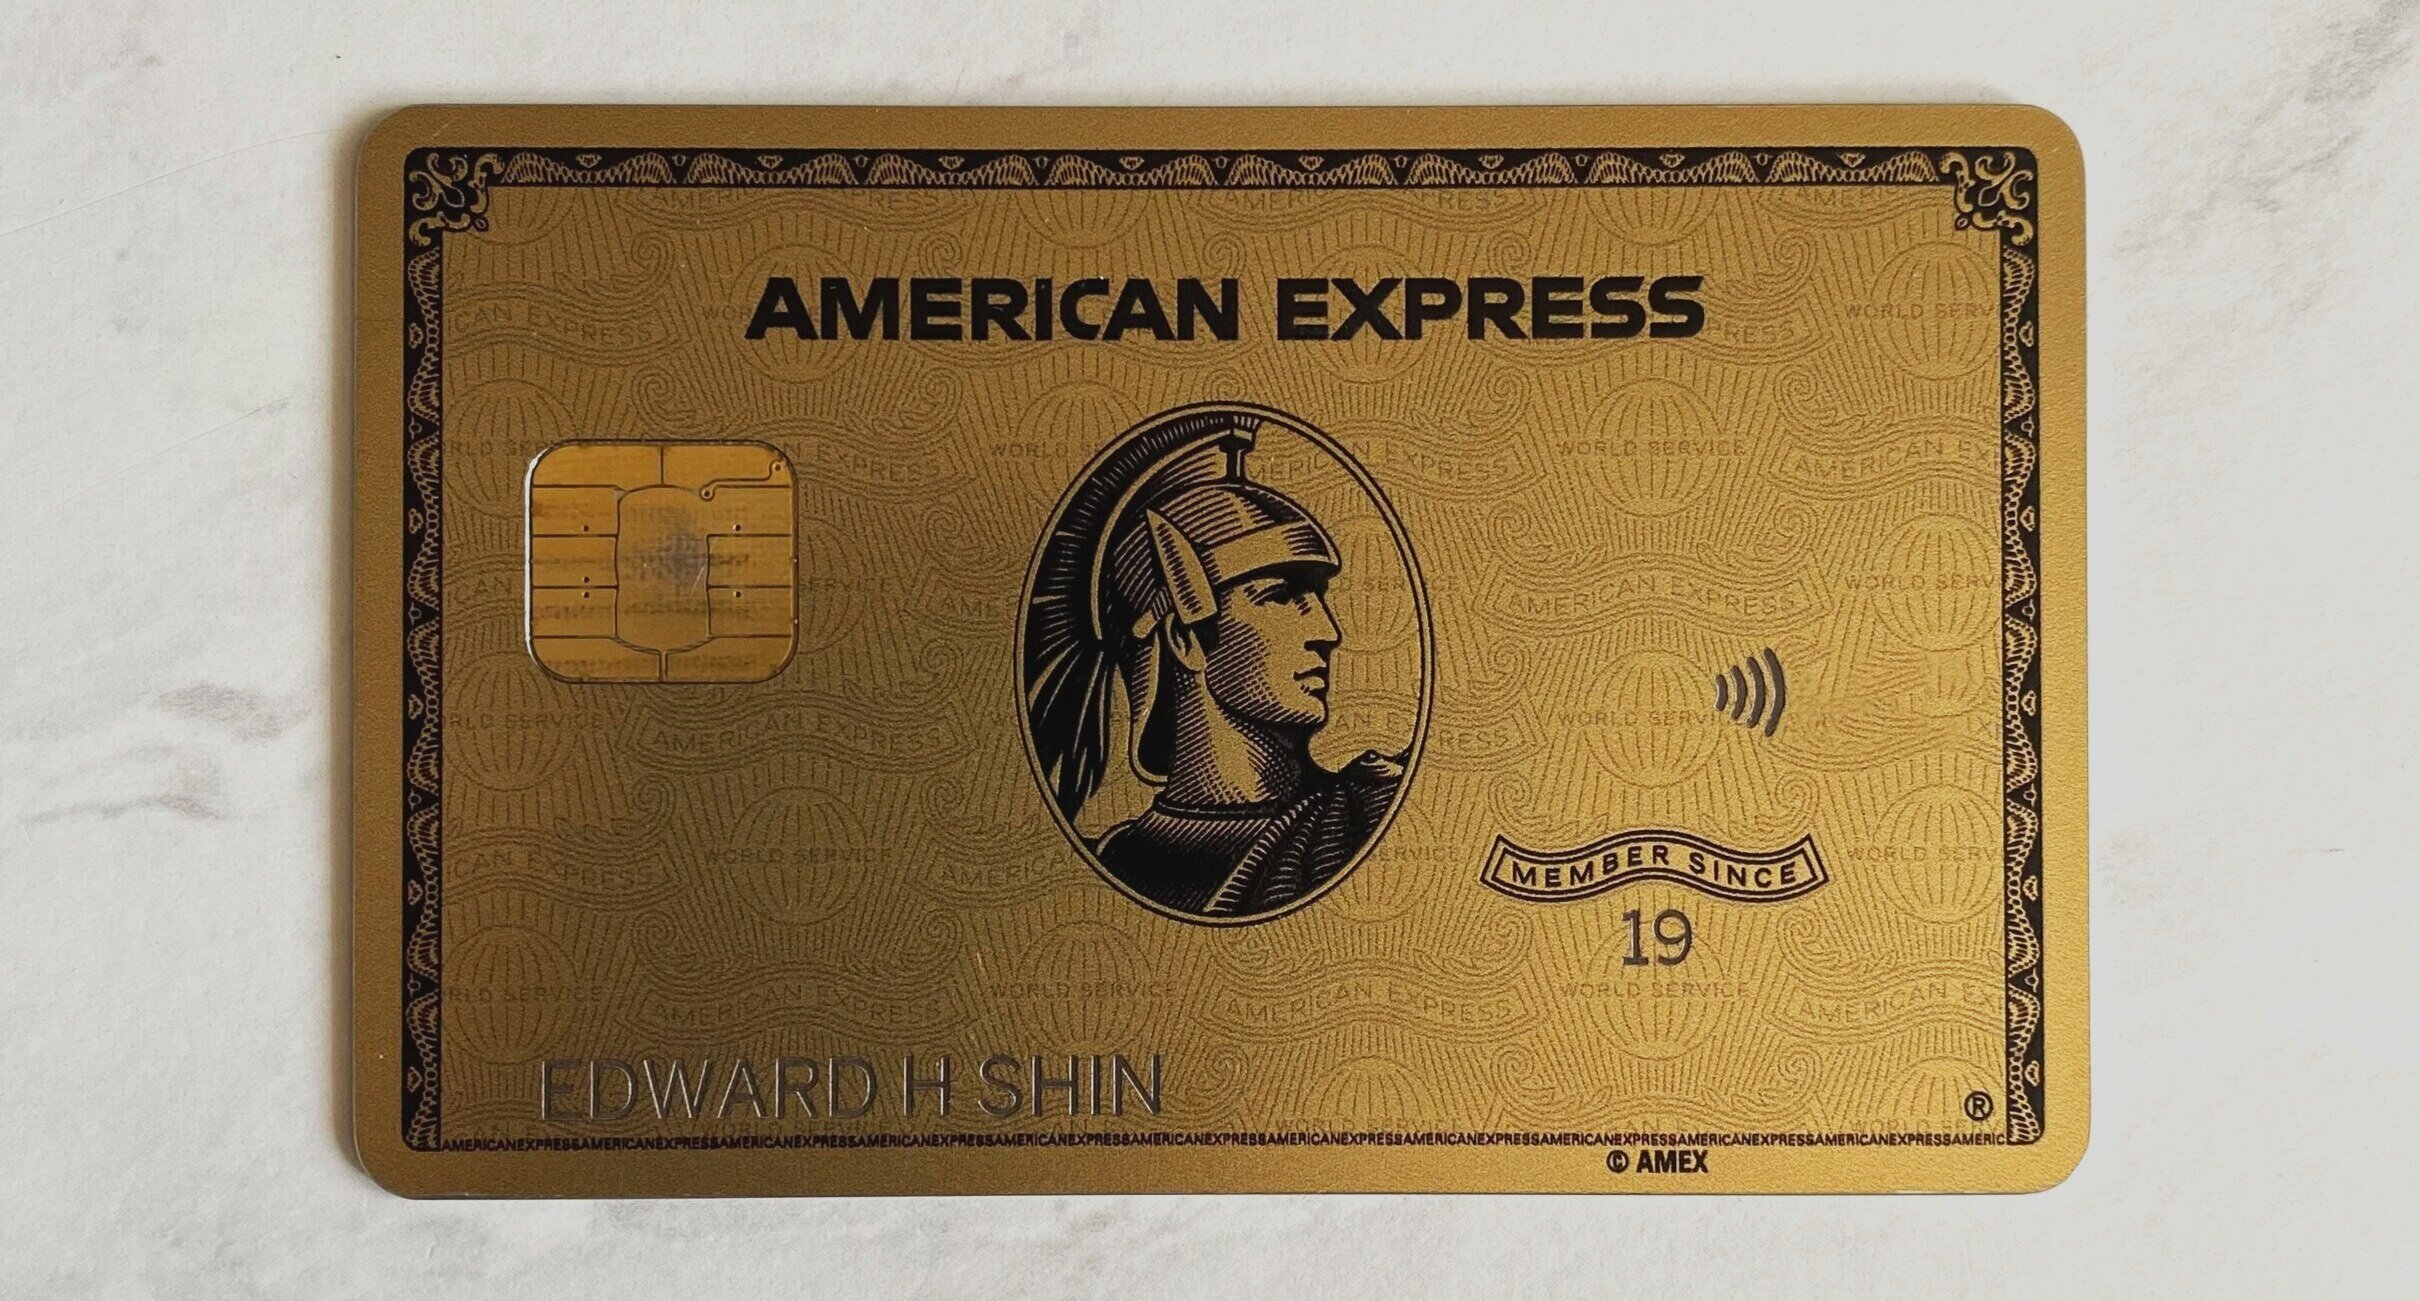 Opinion: Why Now Is the Best Time to Get the AMEX Gold Card